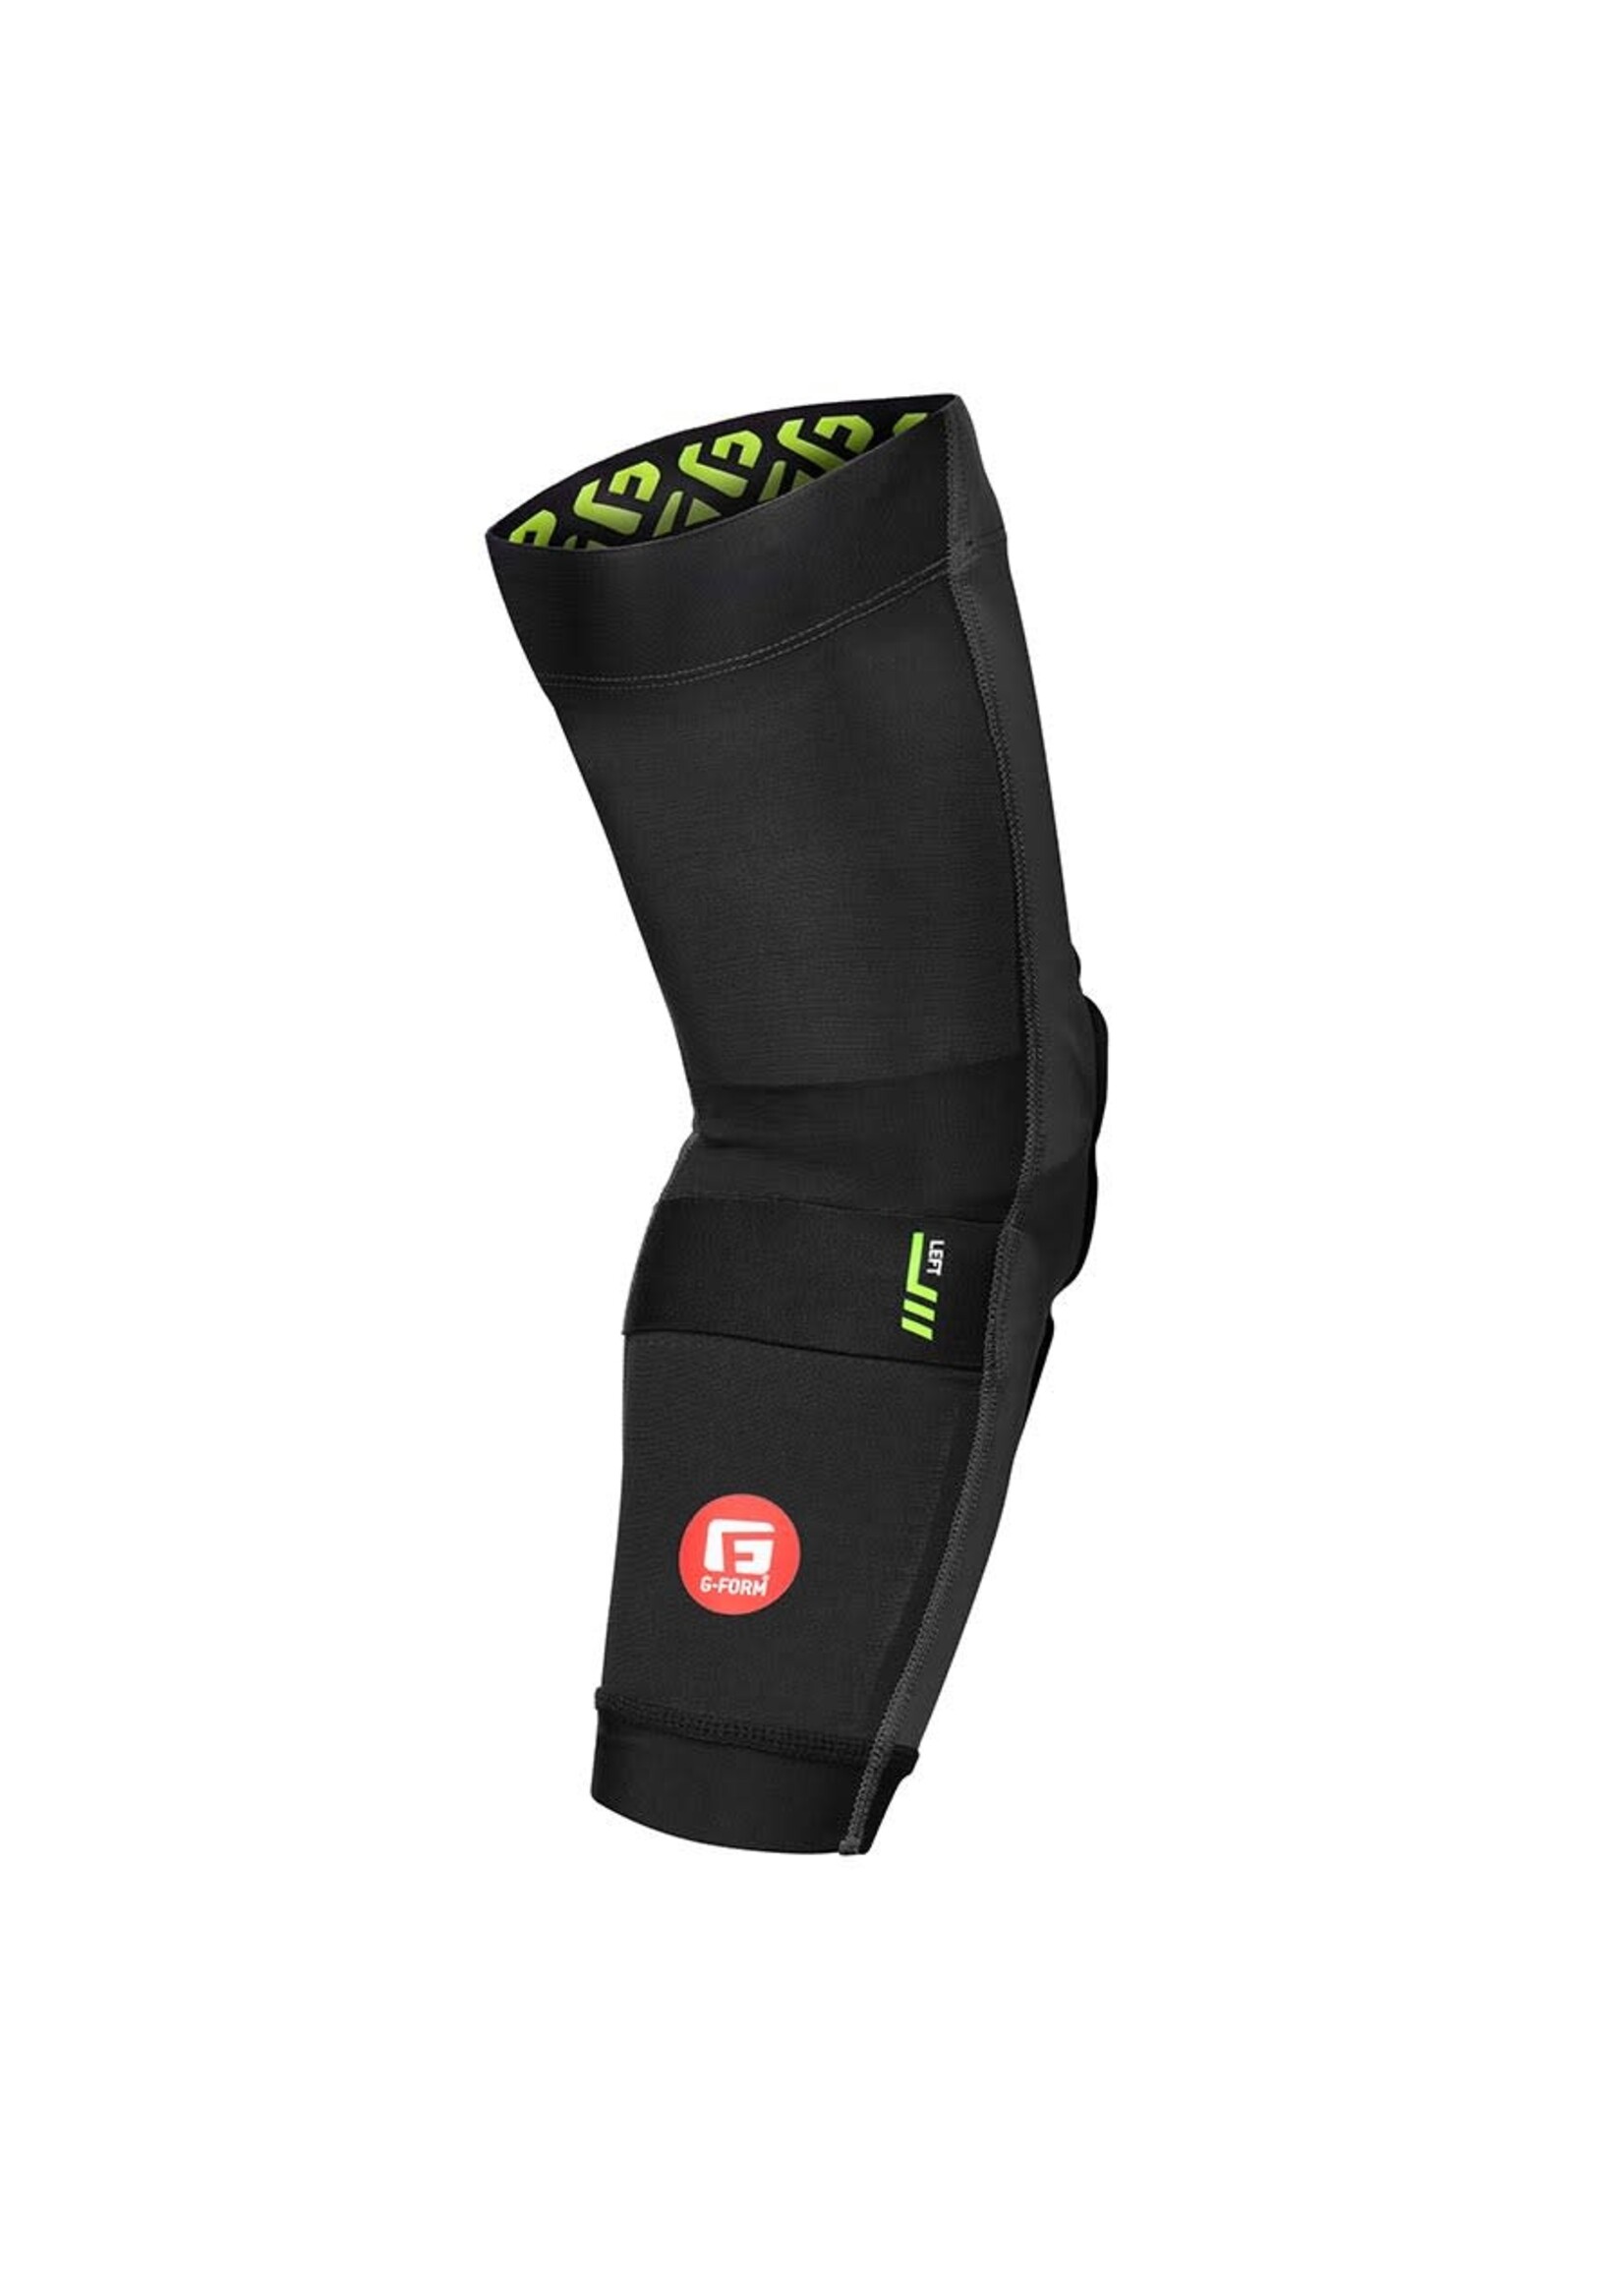 G-Form M Pro-Rugged 2 Elbow/Forearm Guard Black Pair G-Form